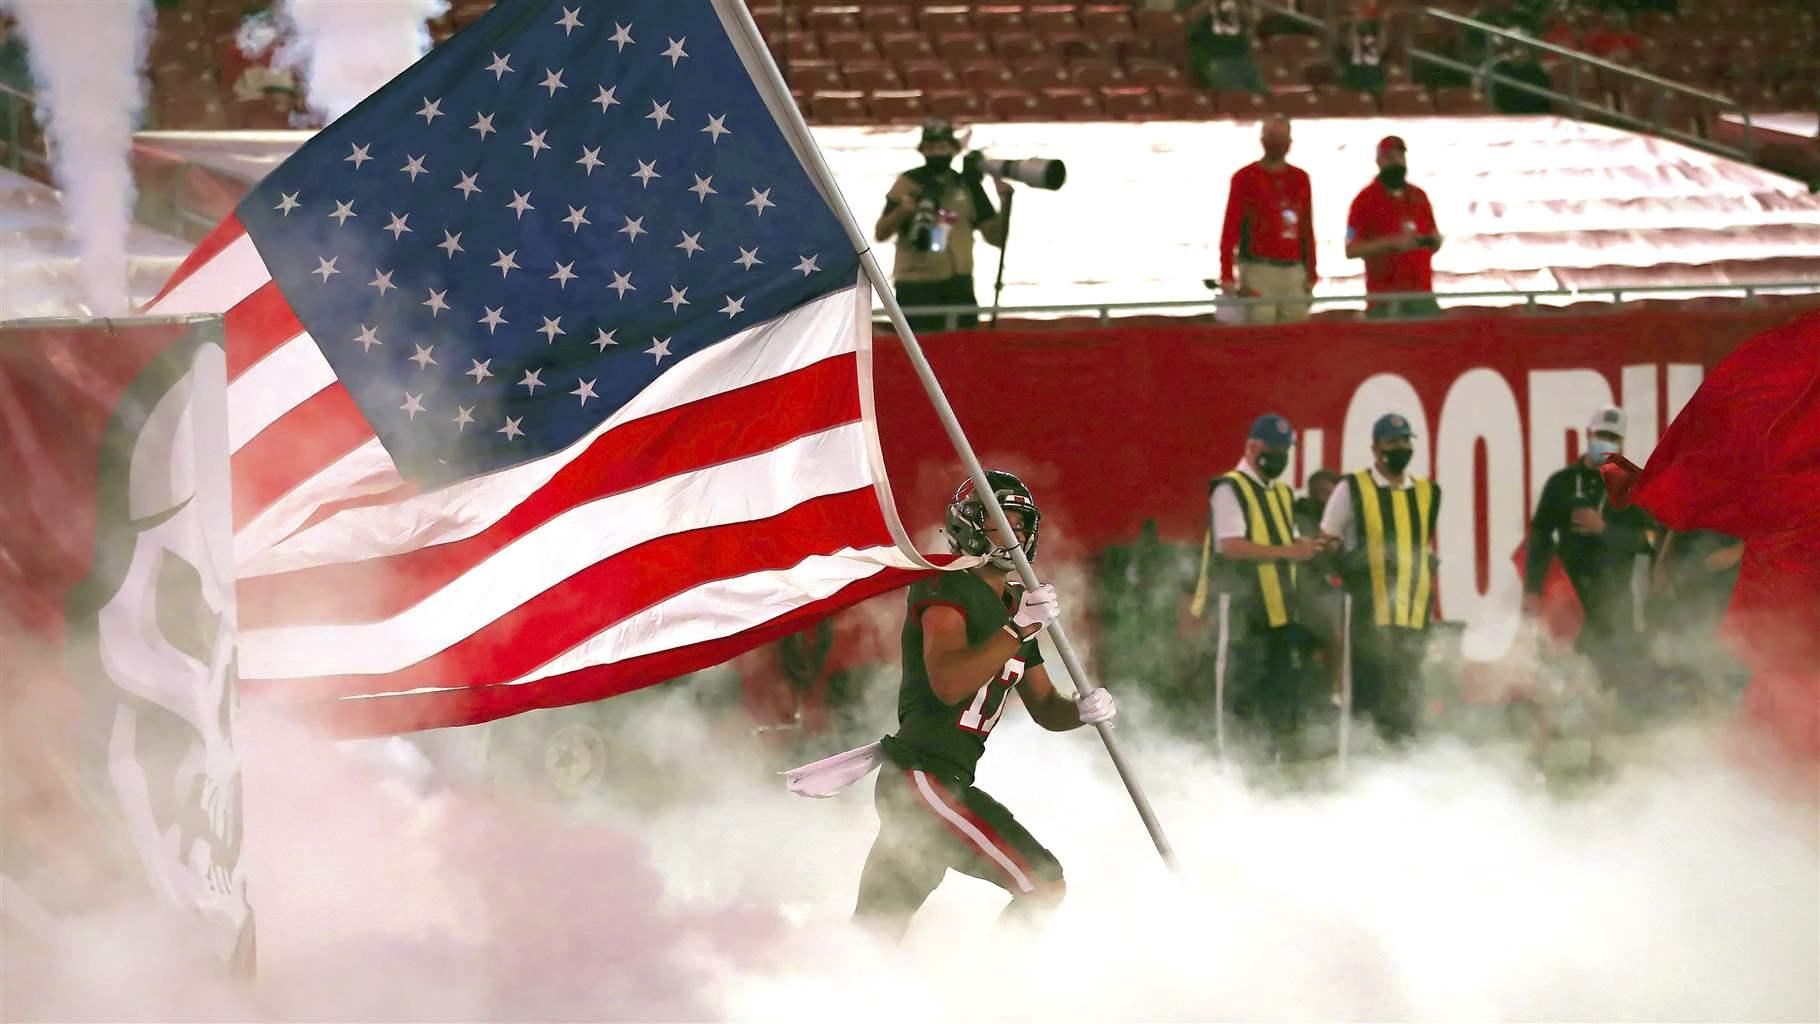 NFL player carrying American flag